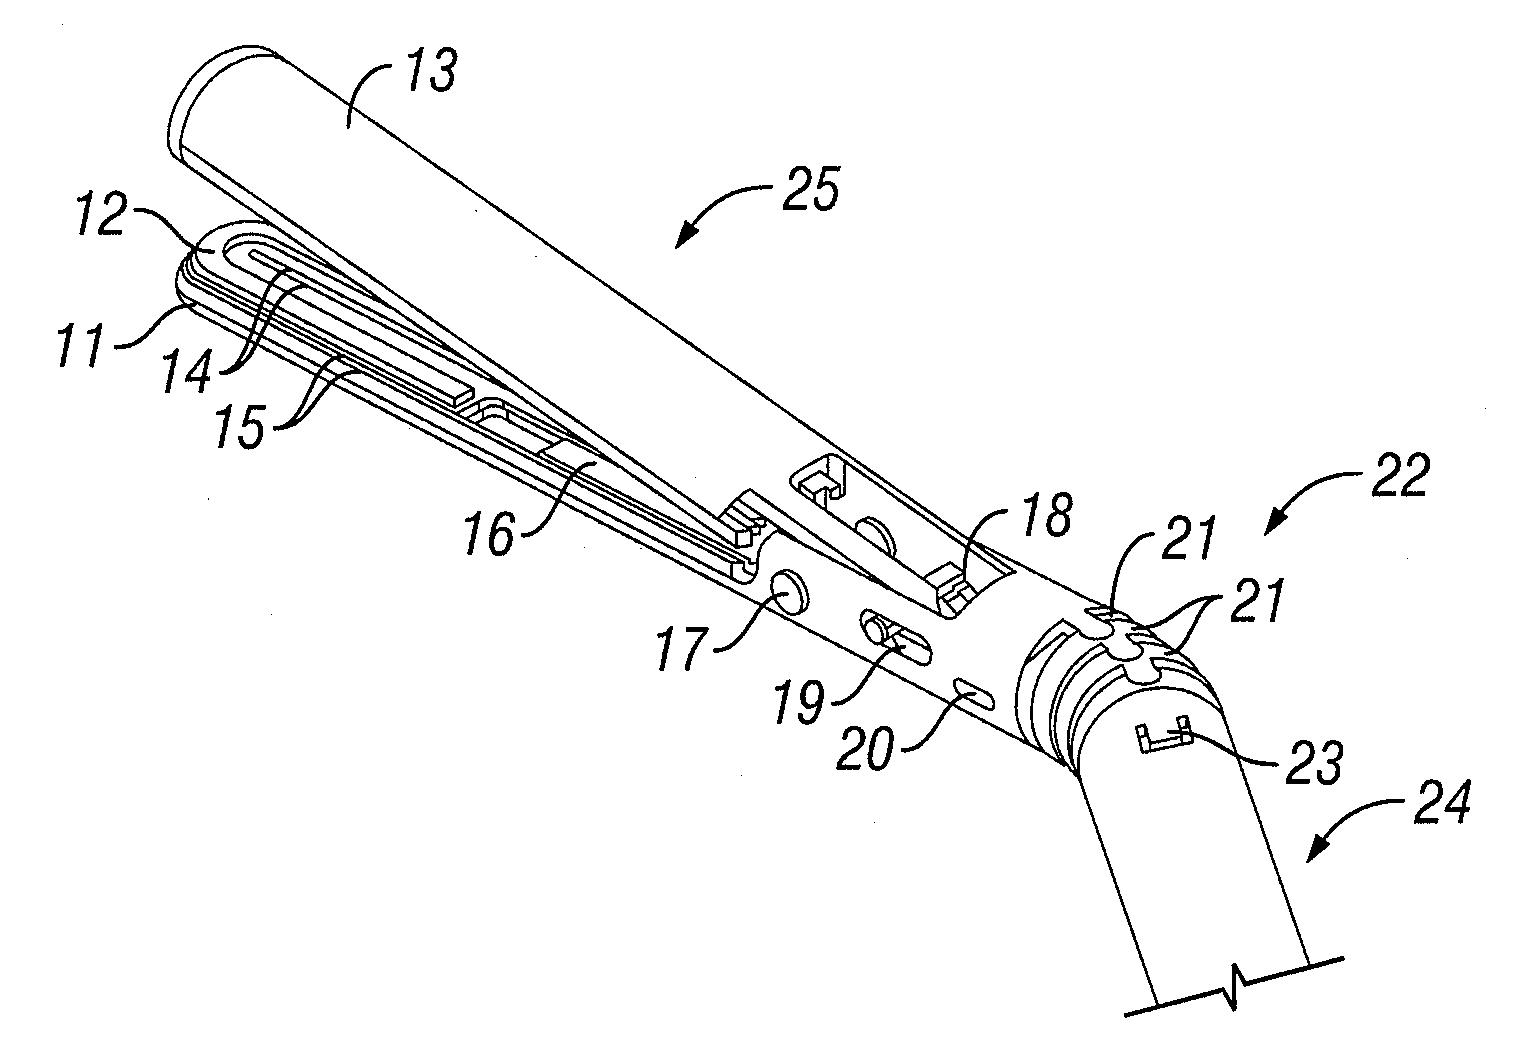 Method and apparatus for articulating the wrist of a laparoscopic grasping instrument